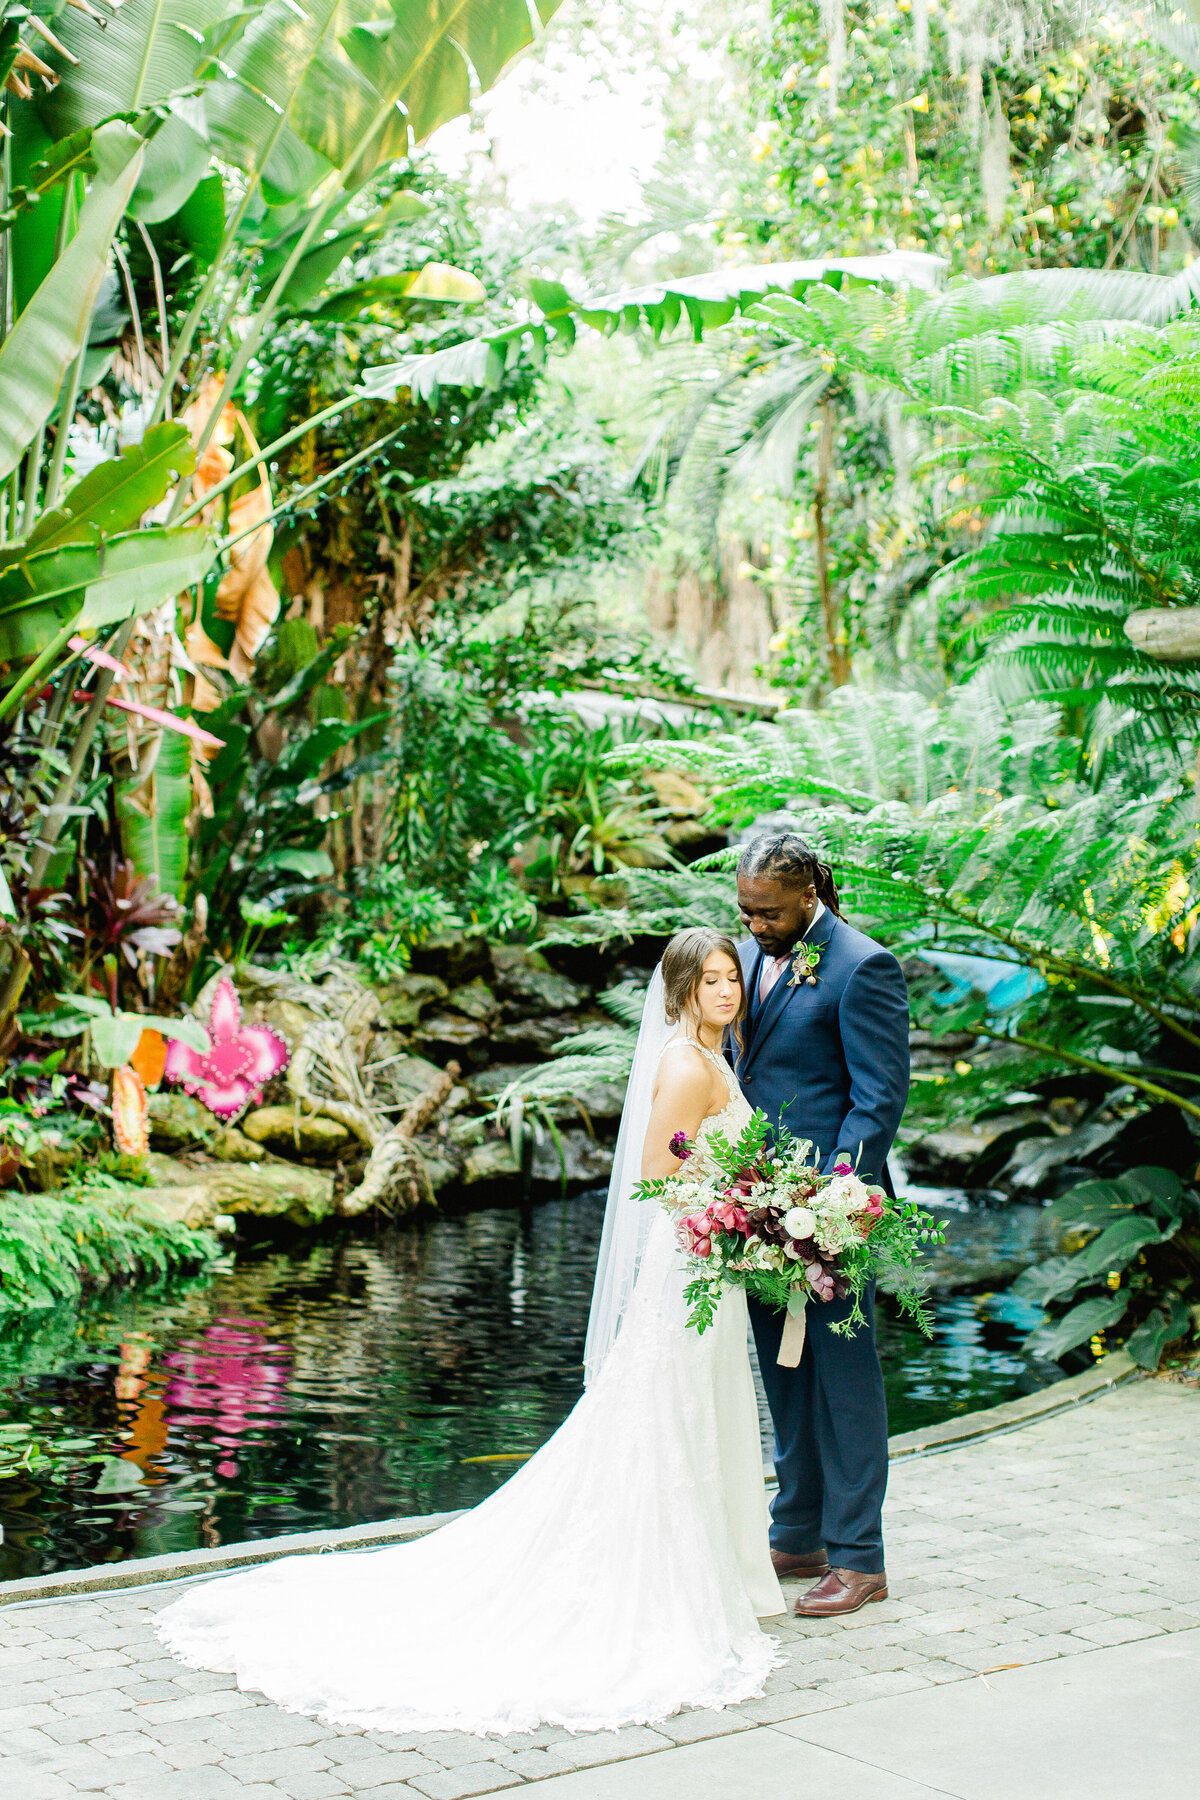 Selby Gardens Wedding @ Ailyn La Torre Photography 2019 - 42403